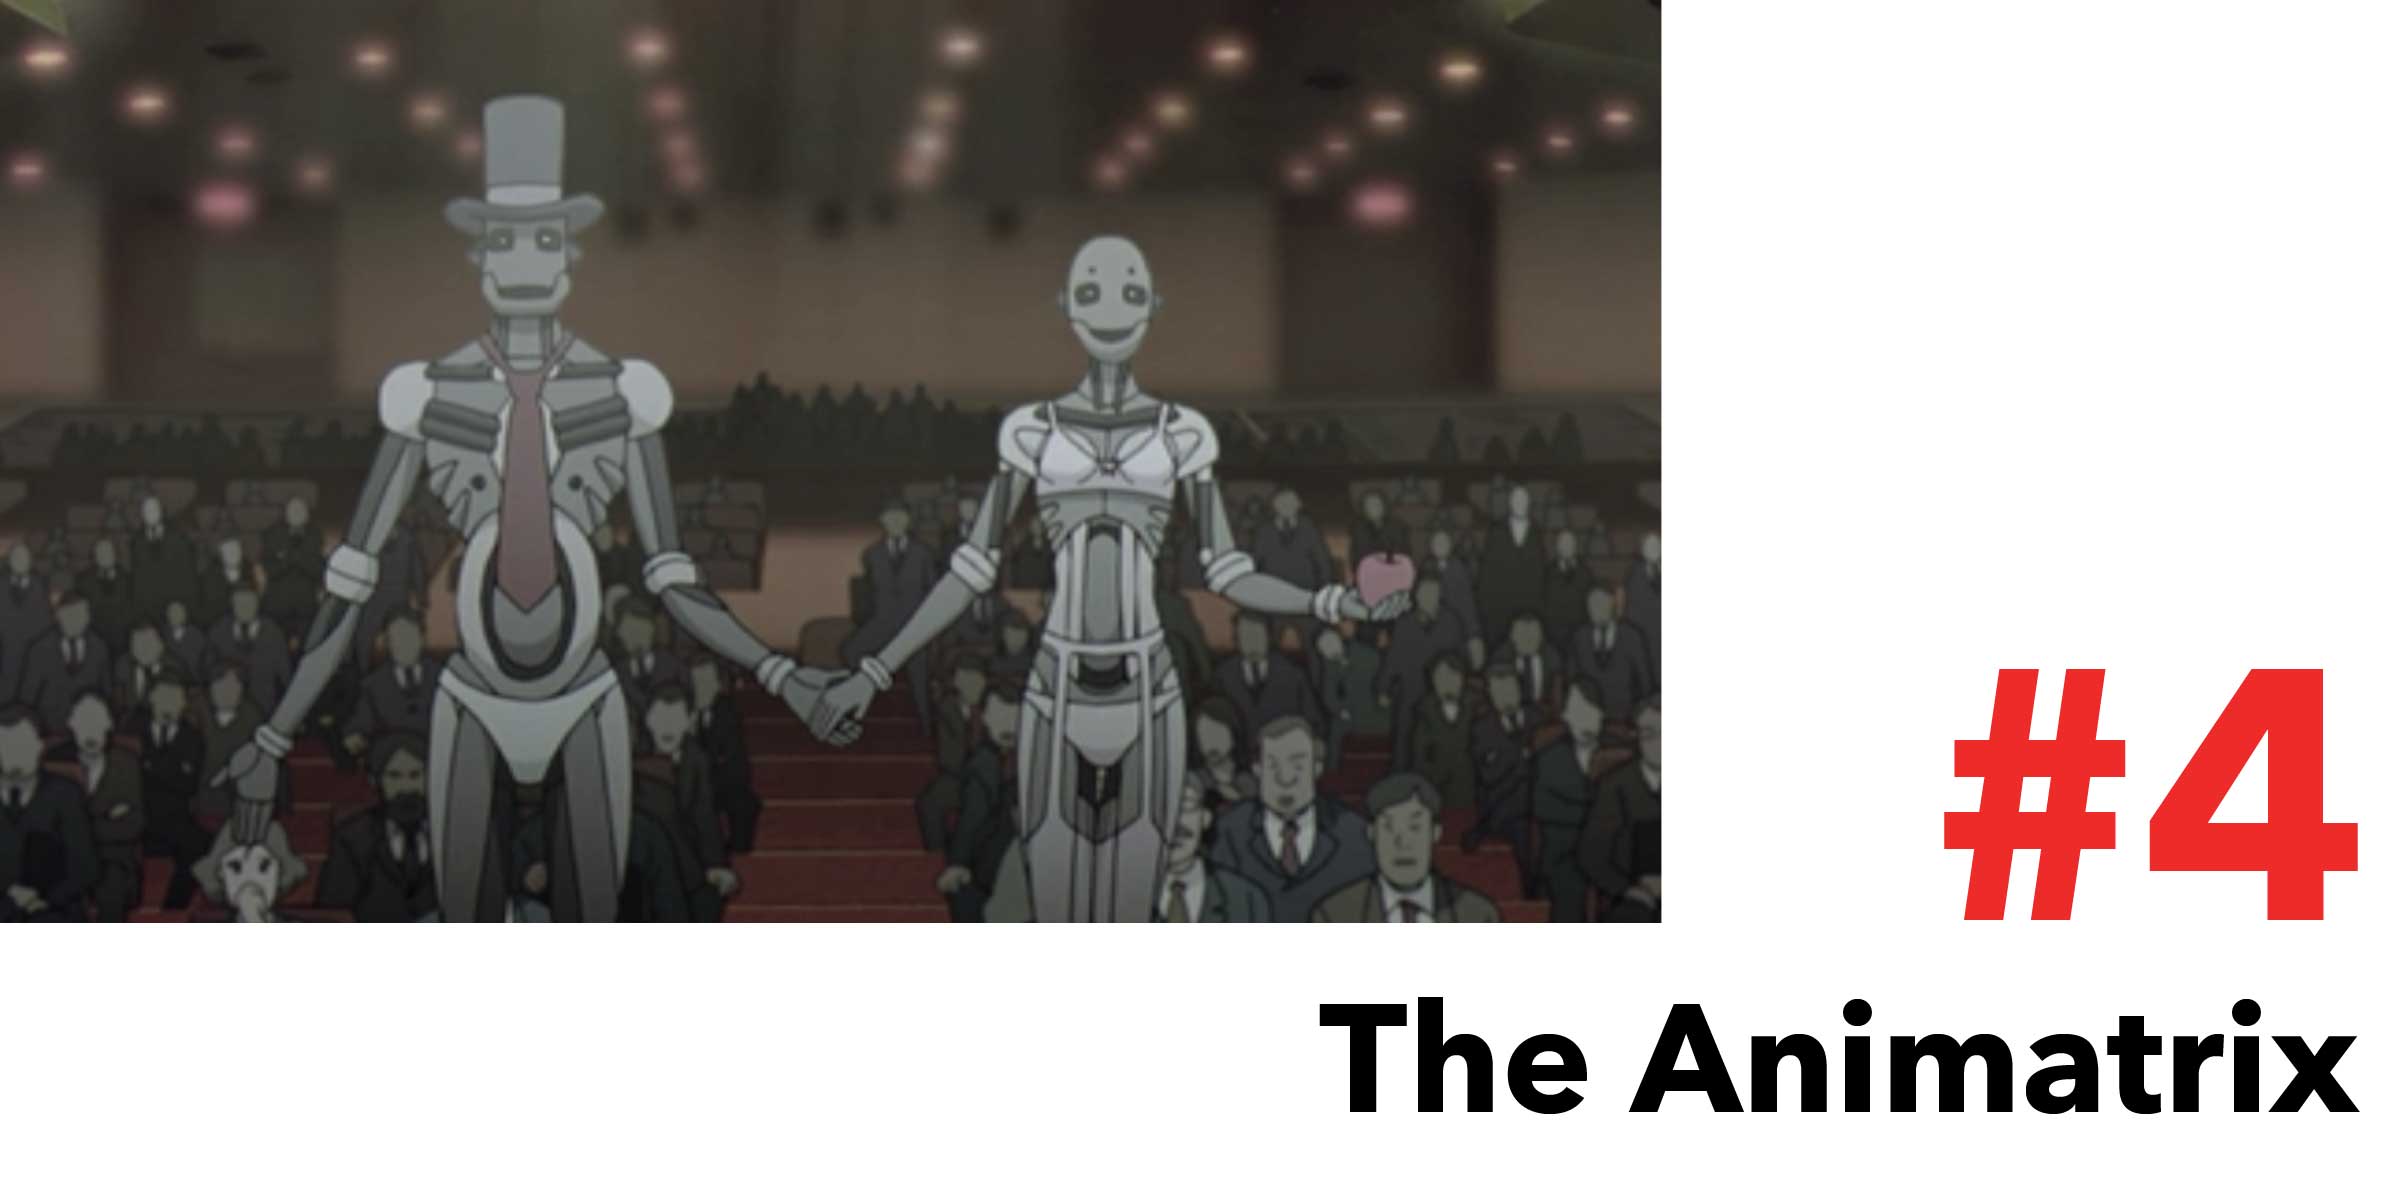 The Animatrix is #4 in the Top 10 Post Apocalyptic Movies on Netflix. Pictured, two smiling robots attend a diplomatic meeting and offer peace with humanity.